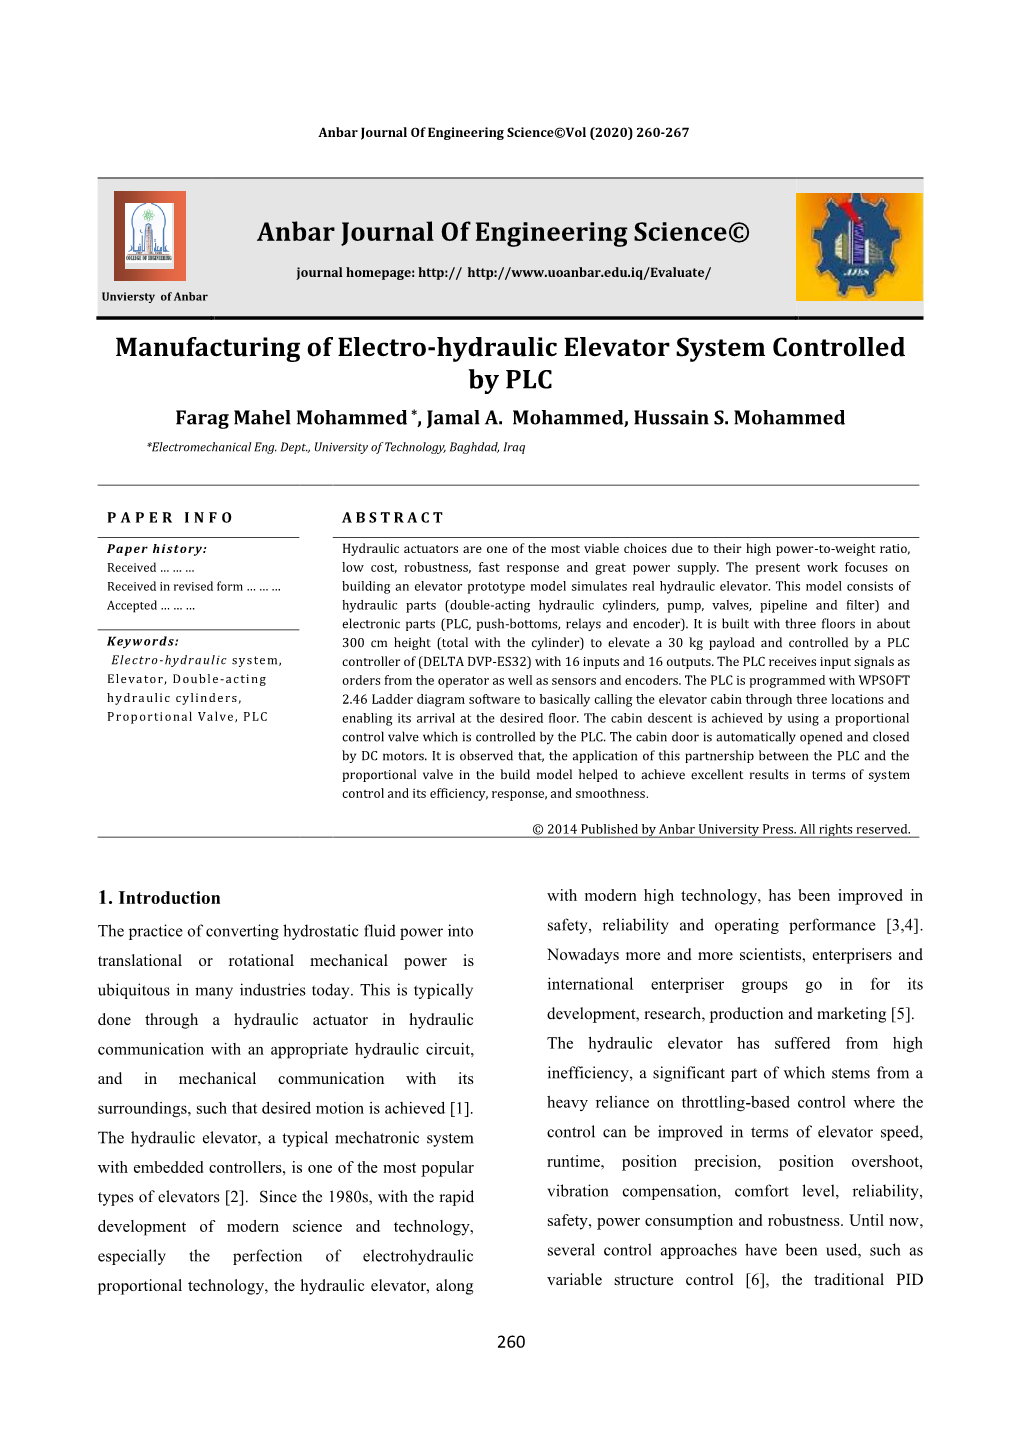 Anbar Journal of Engineering Science© Manufacturing of Electro